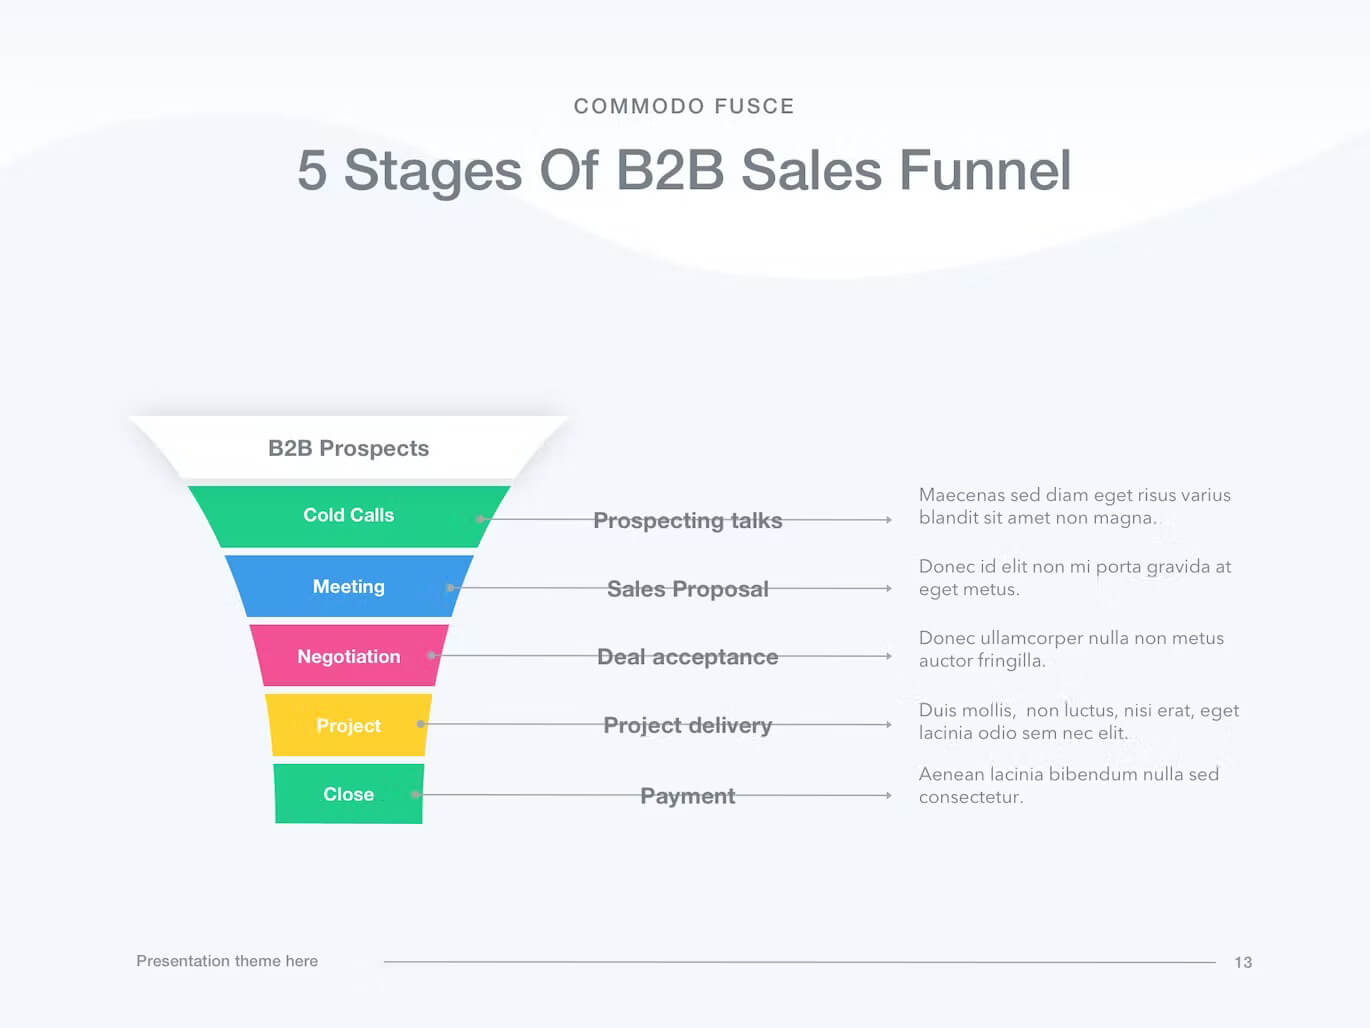 5 stages of B2B Sales Funnel.